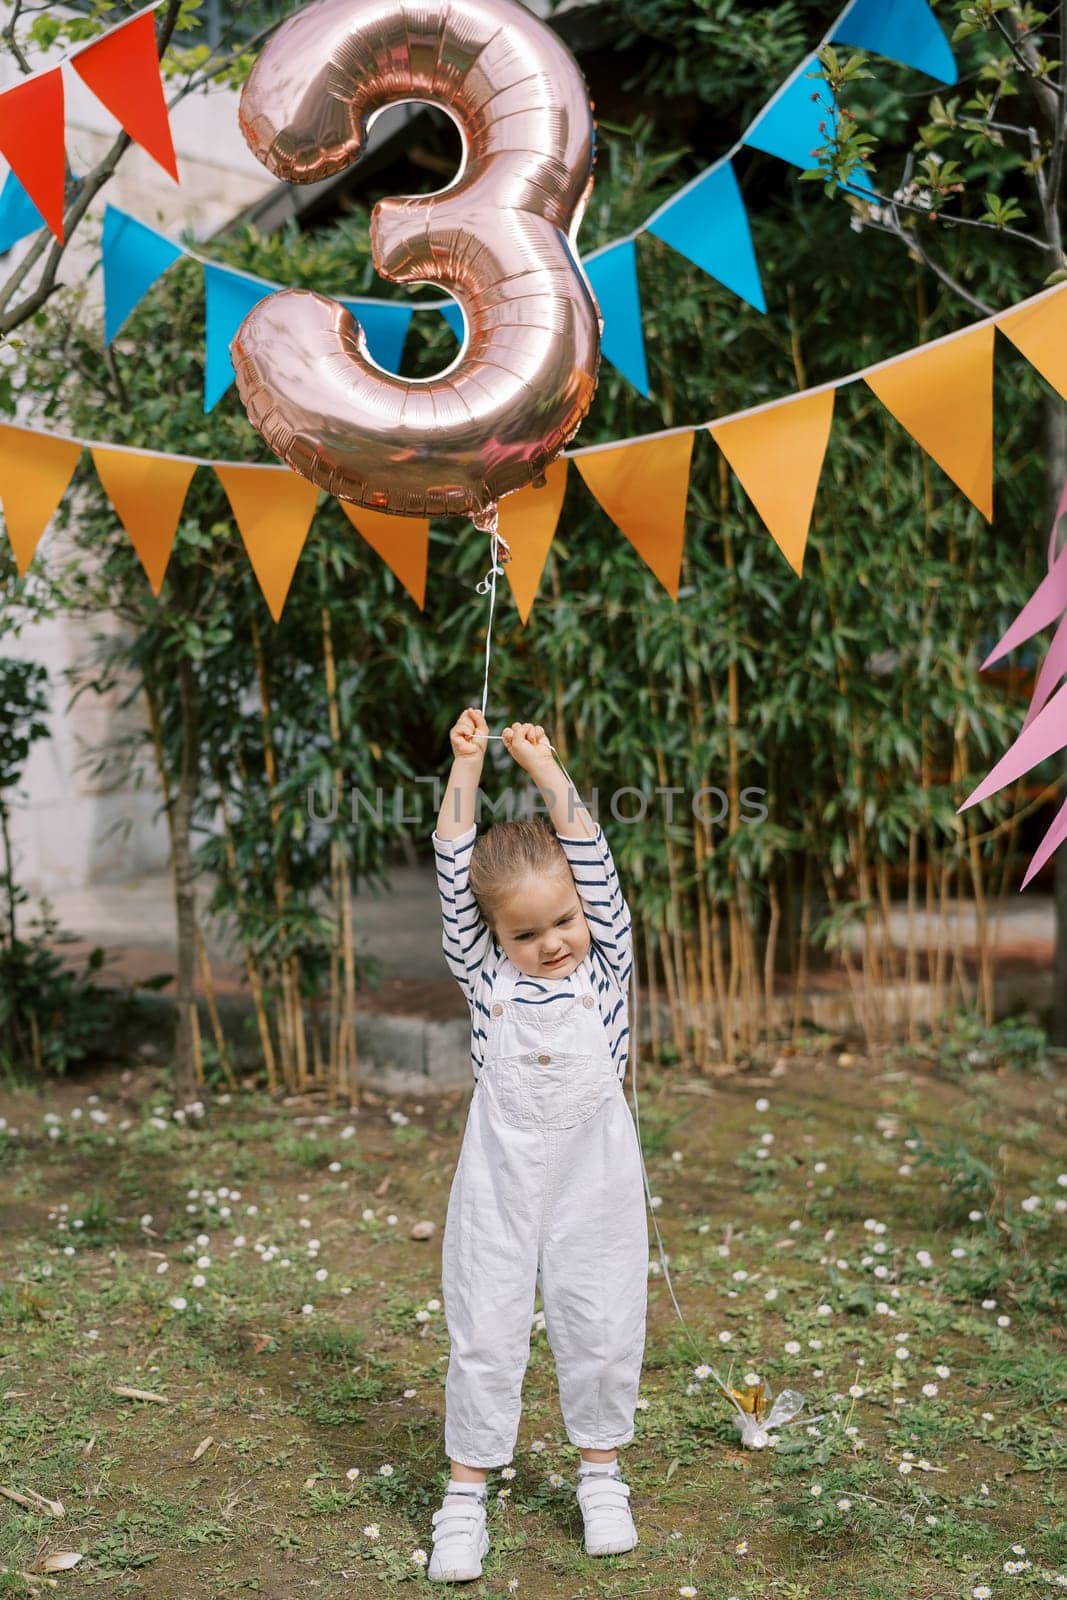 Little girl stands on a green lawn under colorful flags on a string and holds an inflatable number 3 . High quality photo